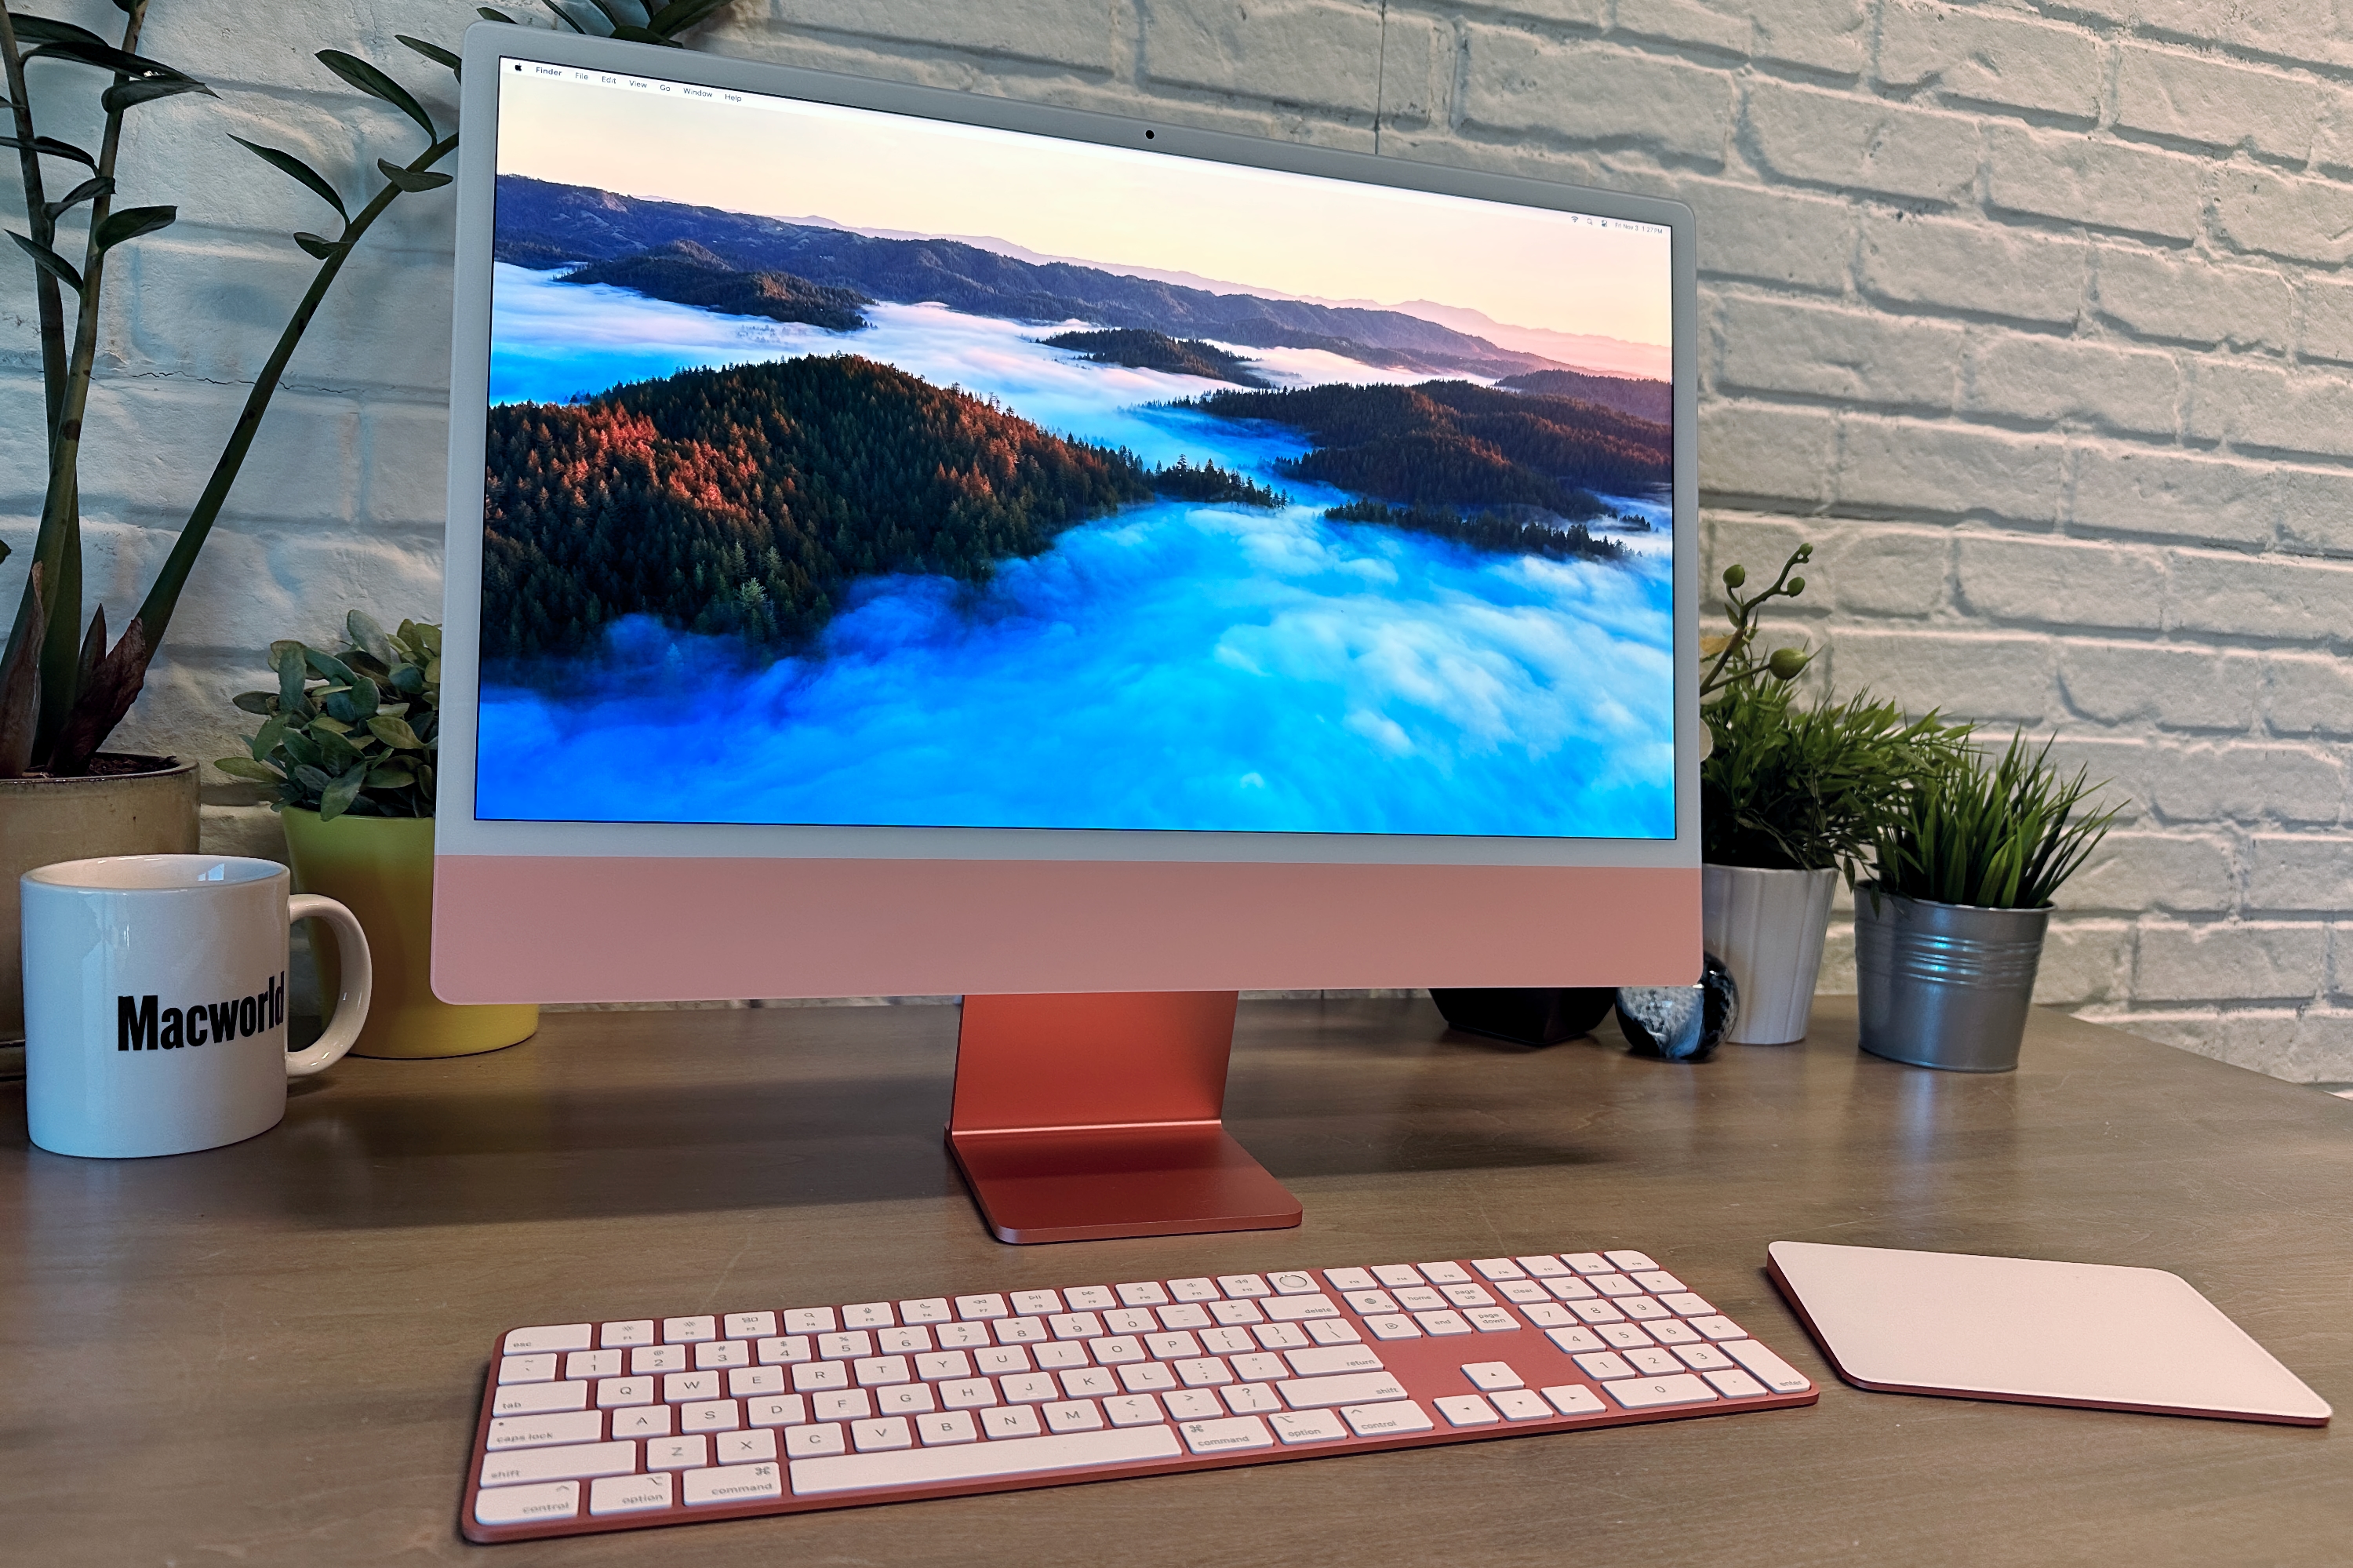 M3 iMac: Everything you need to know